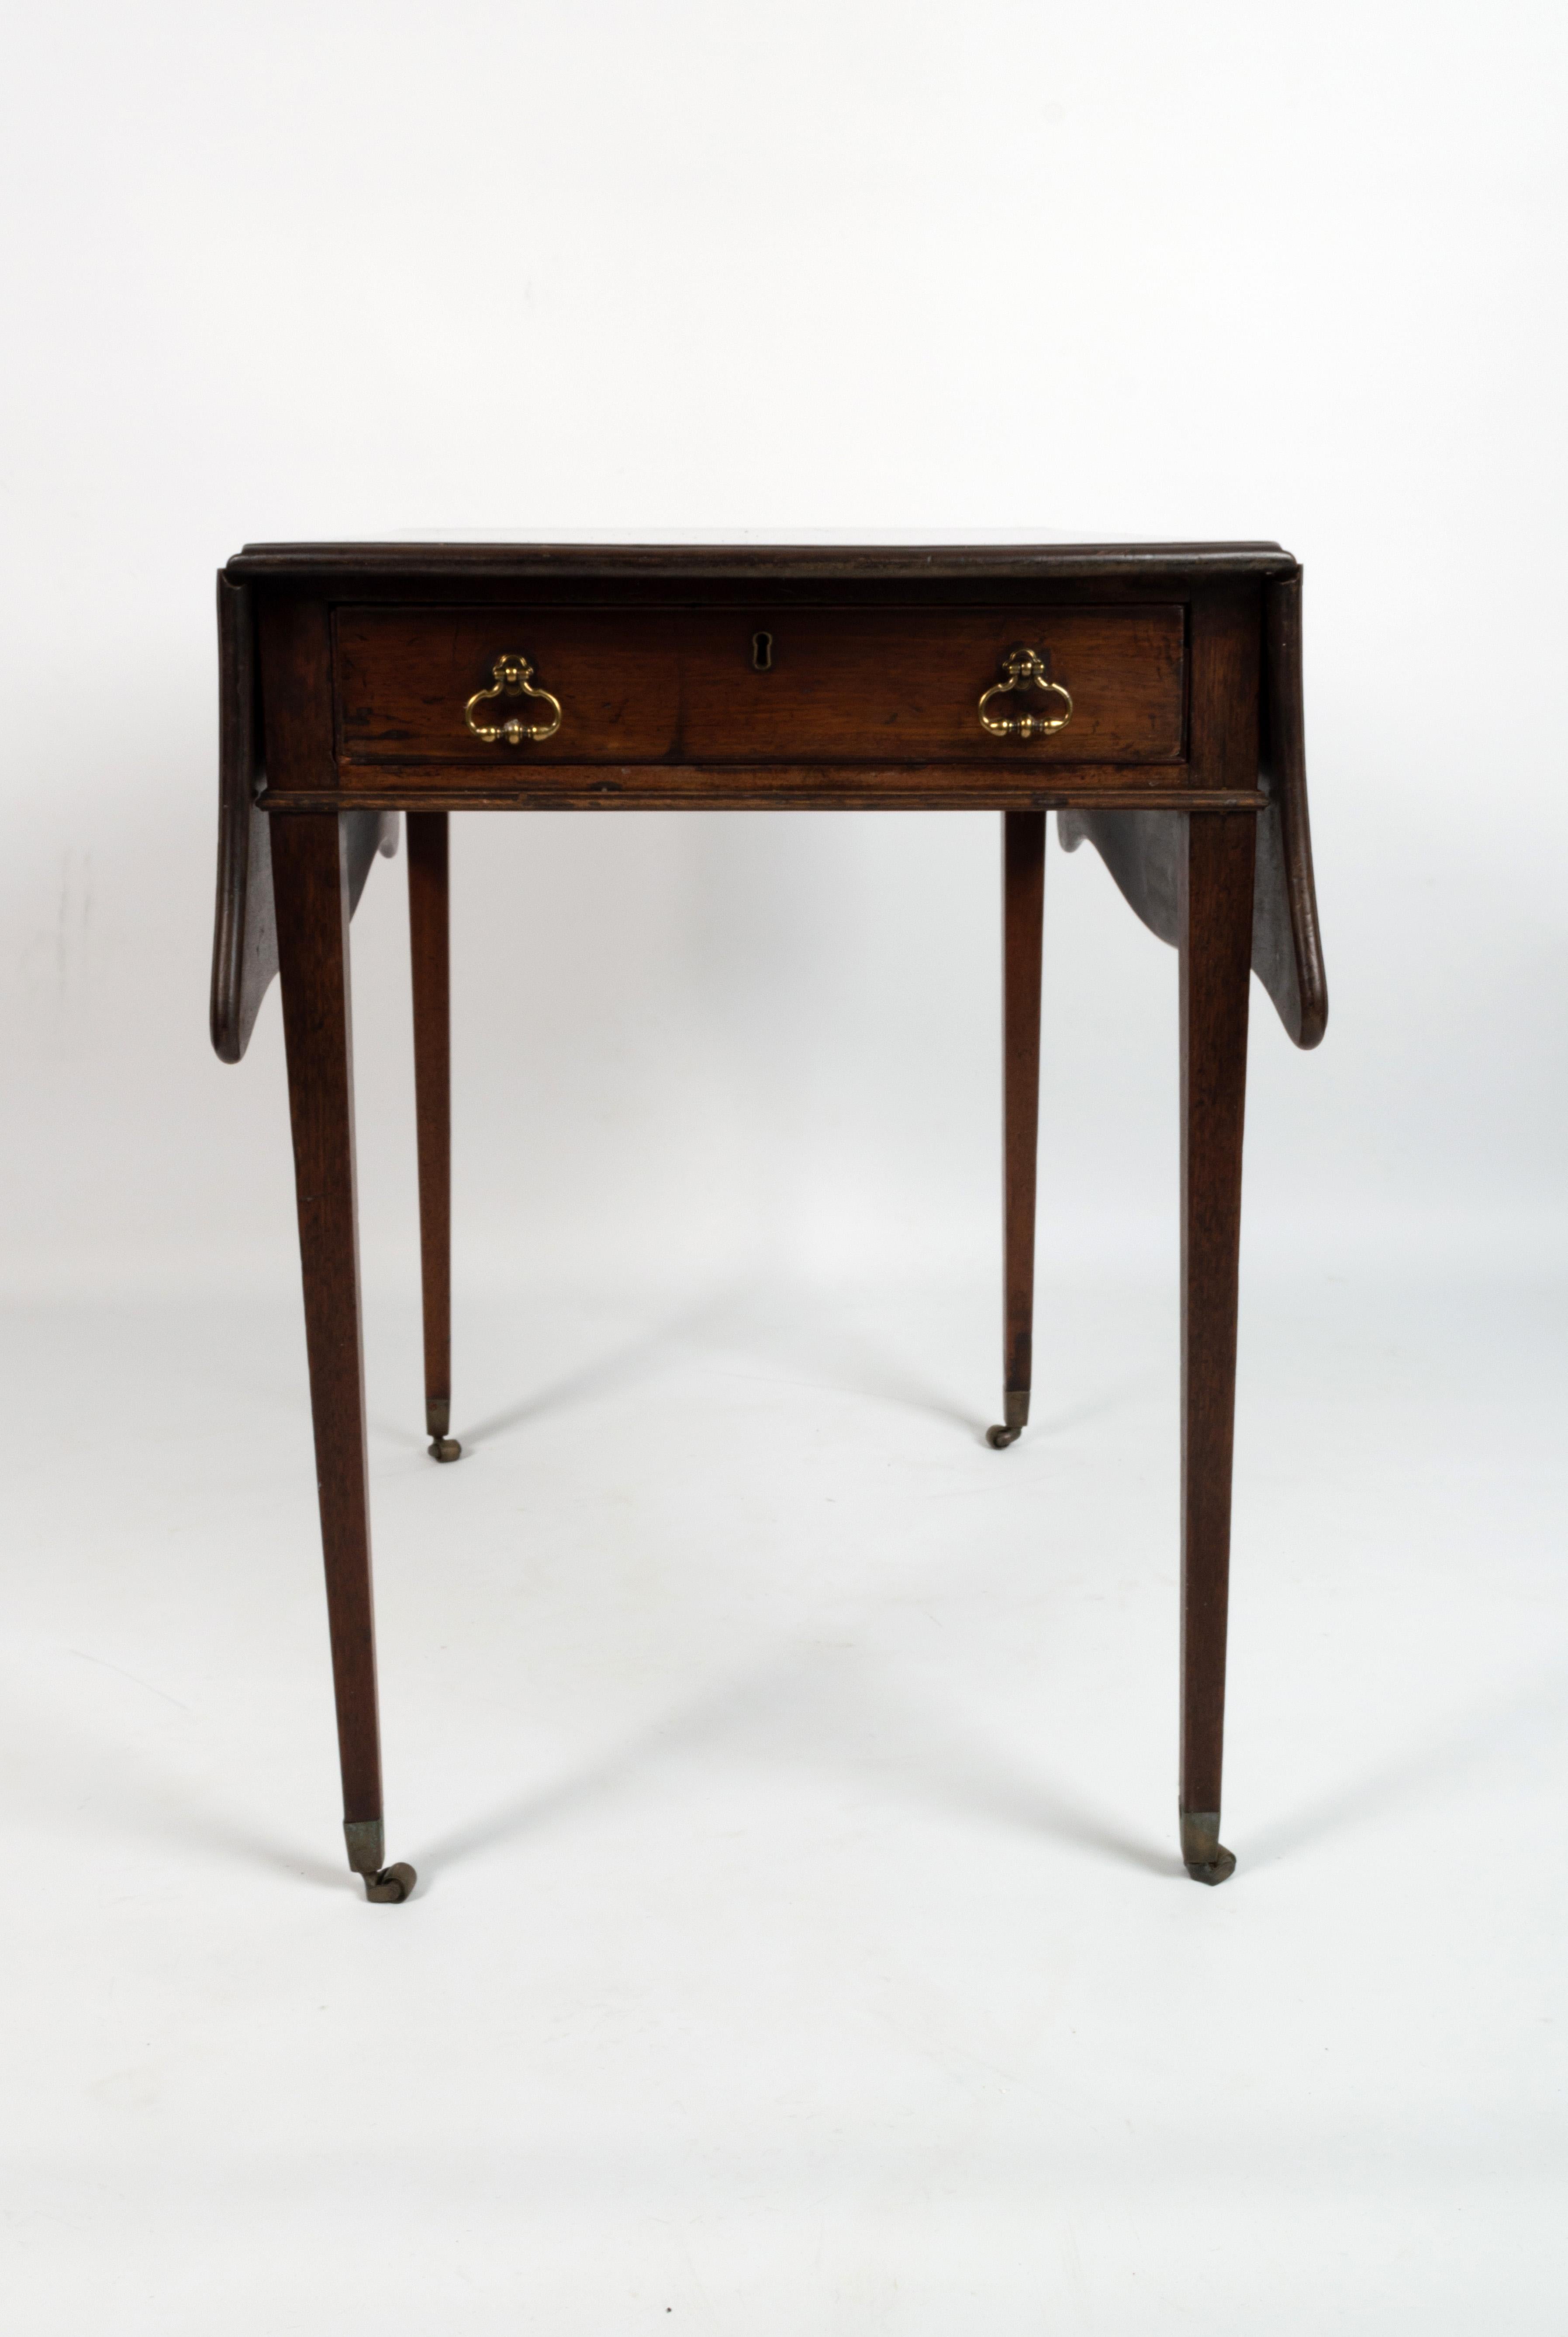 Antique English 18th Century George III Mahogany Butterfly Pembroke Table C.1780 In Good Condition For Sale In London, GB